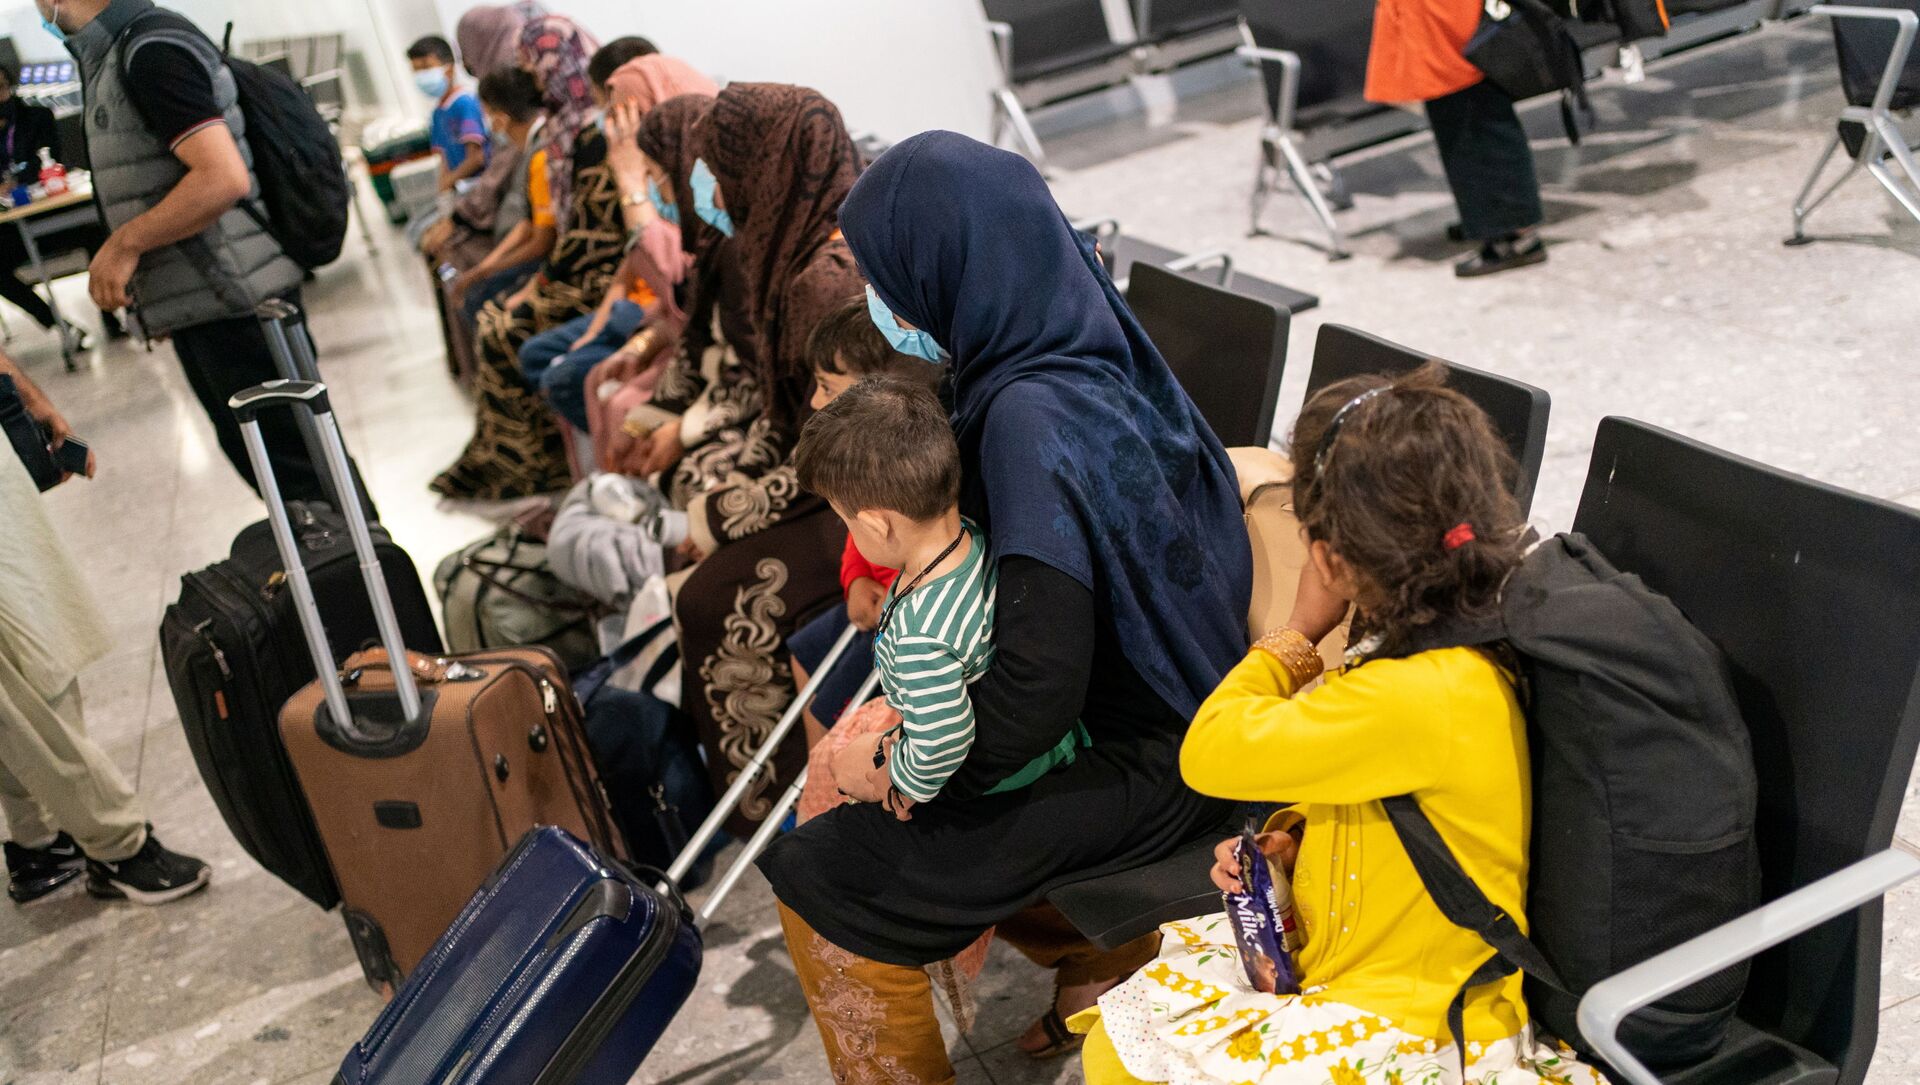 Refugees from Afghanistan wait to be processed after arriving on an evacuation flight at Heathrow Airport, in London, Britain August 26, 2021 - Sputnik International, 1920, 01.09.2021